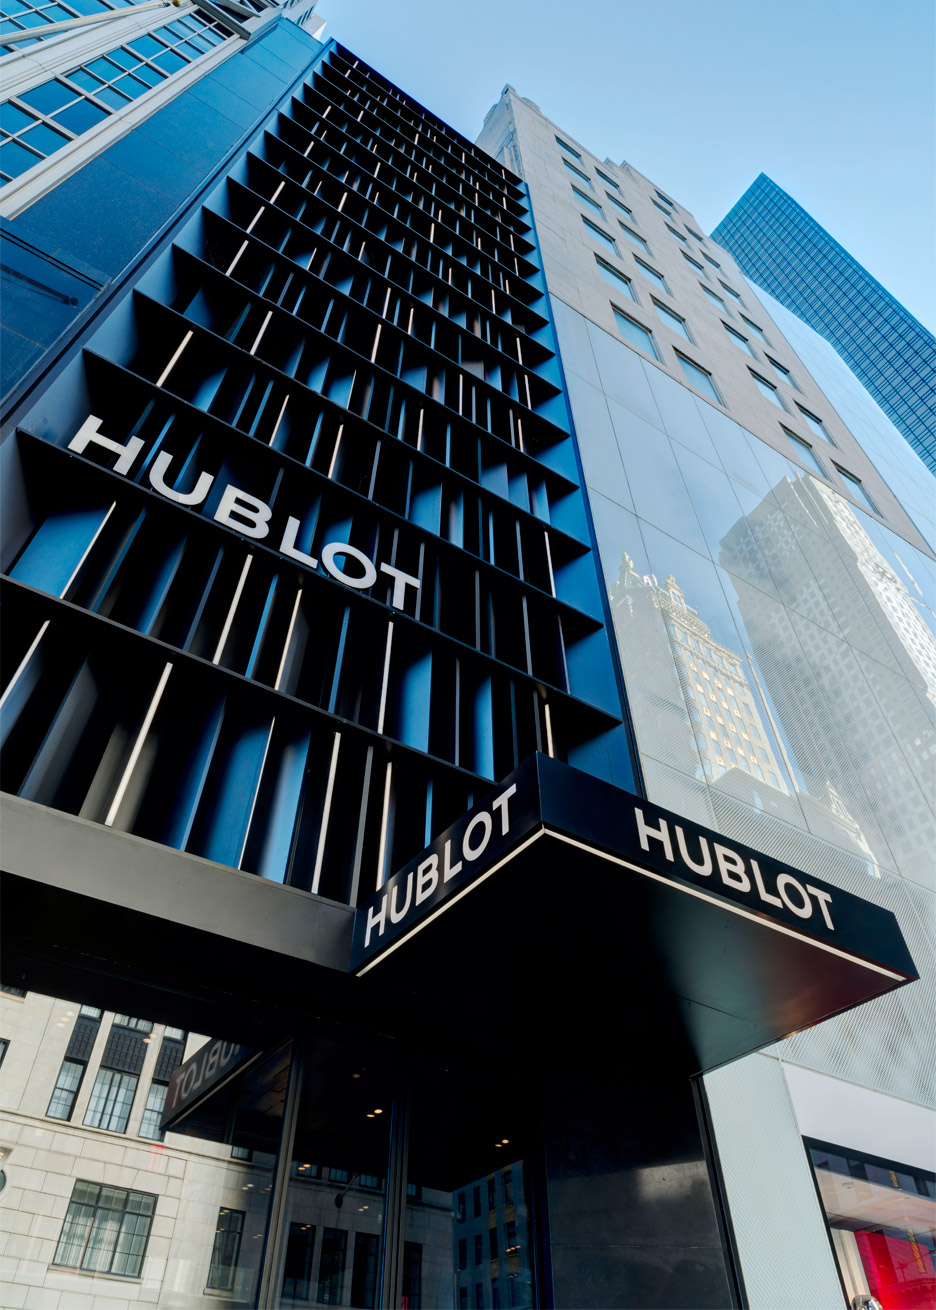 Hublot Fifth Avenue in New York City, retail architecture and interiors by Peter Marino. Photograph by Adrian Wilson